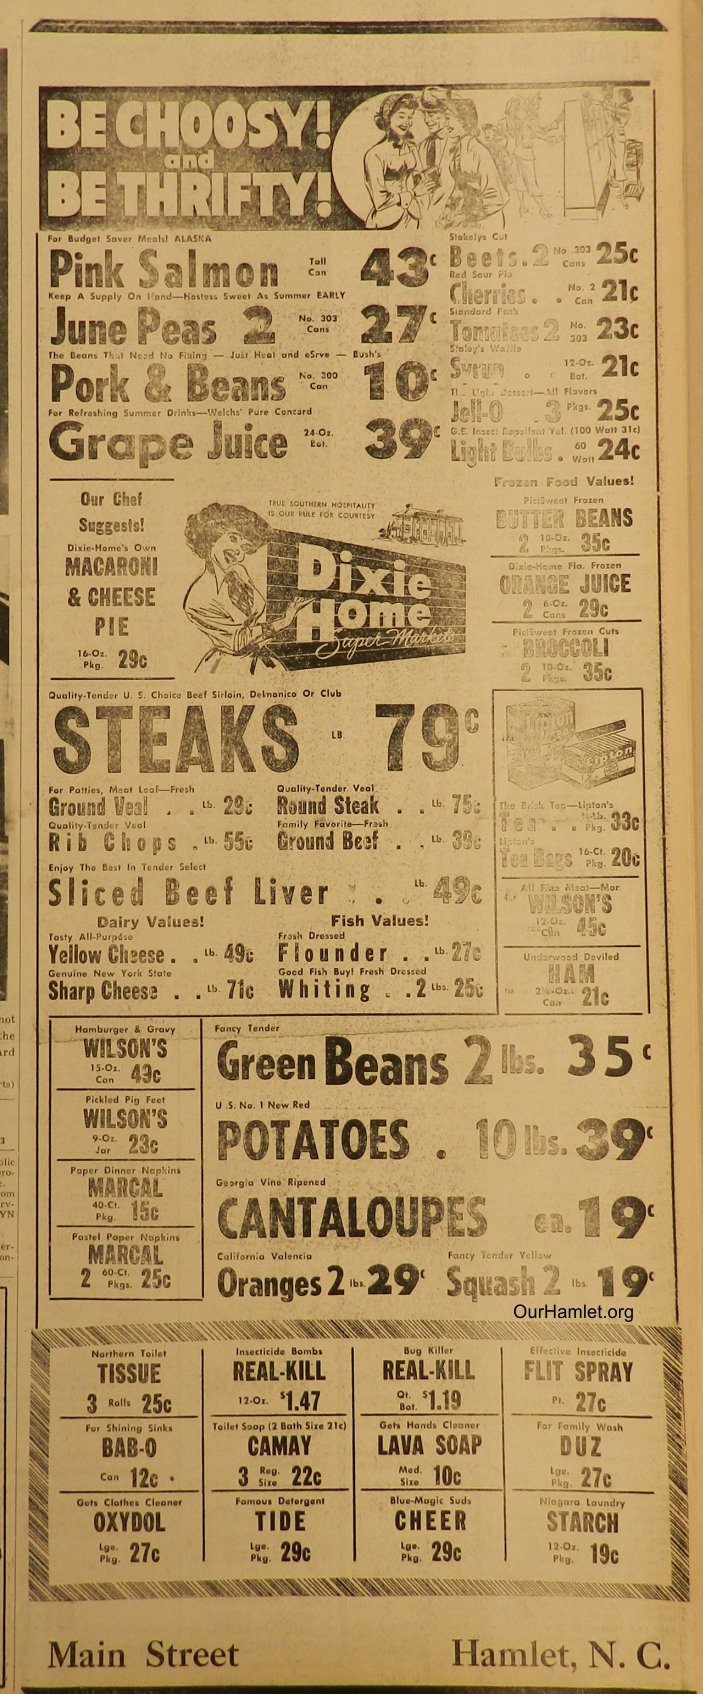 1953 Dixie Home grocery OH.jpg